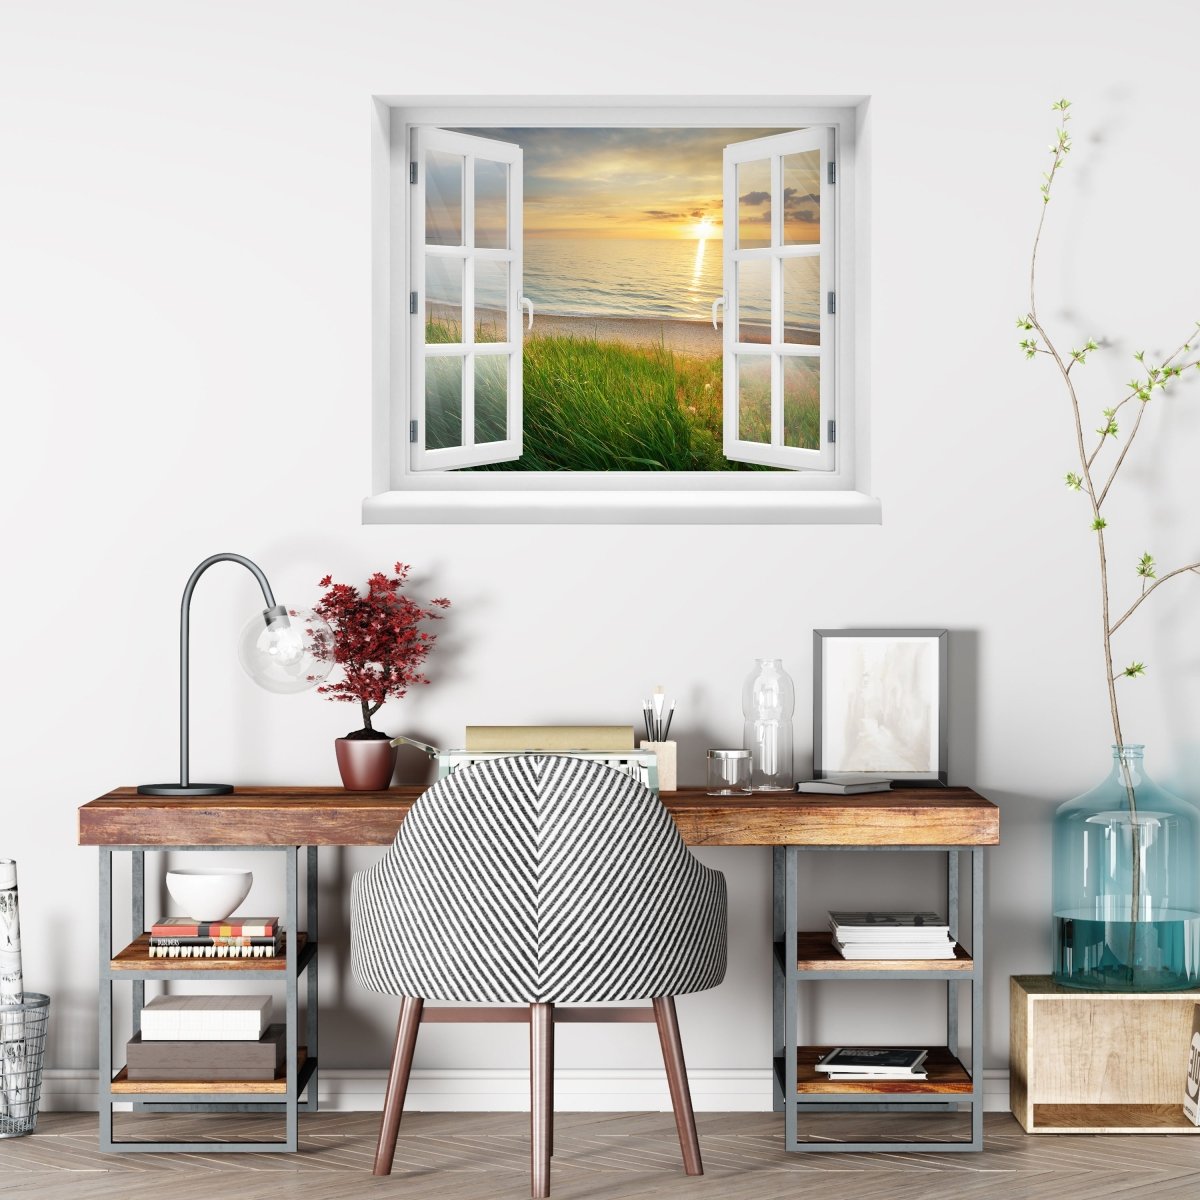 3D wall sticker Sunset on the coast - Wall decal M0913